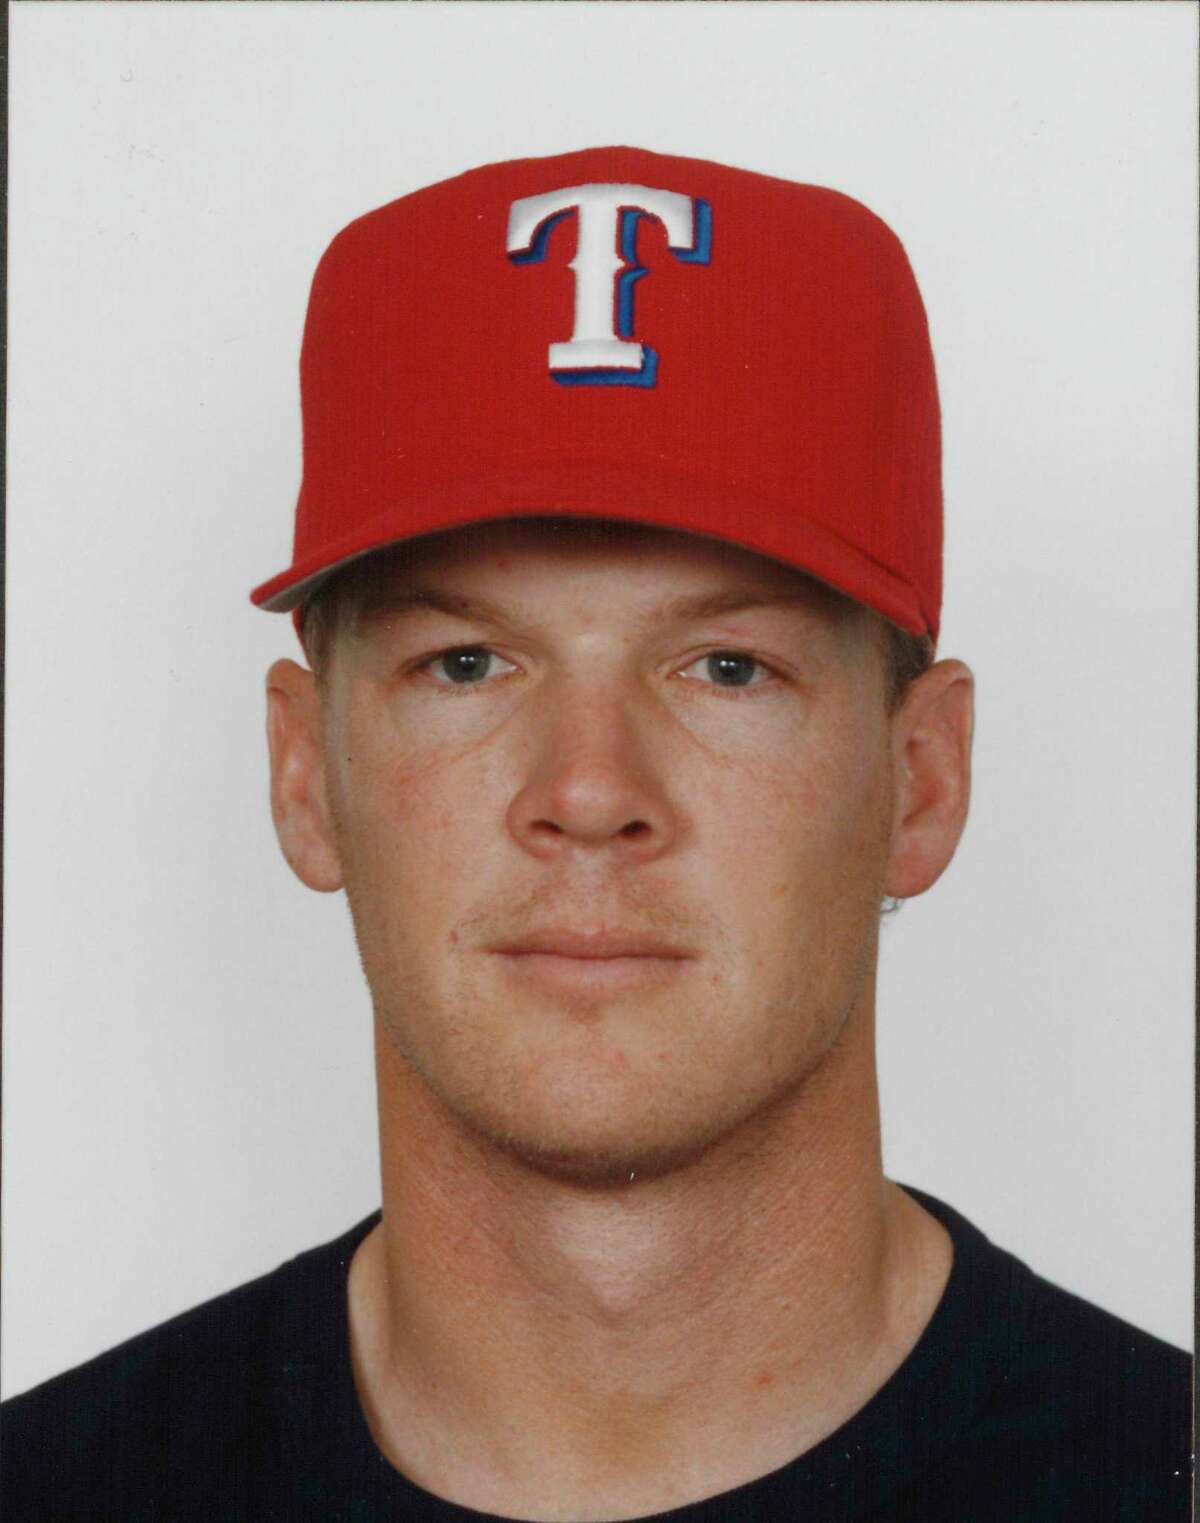 Tom Arrington, who is from Marin County and played at Tam High, pitched for the Rangers as a replacement player in 1994.